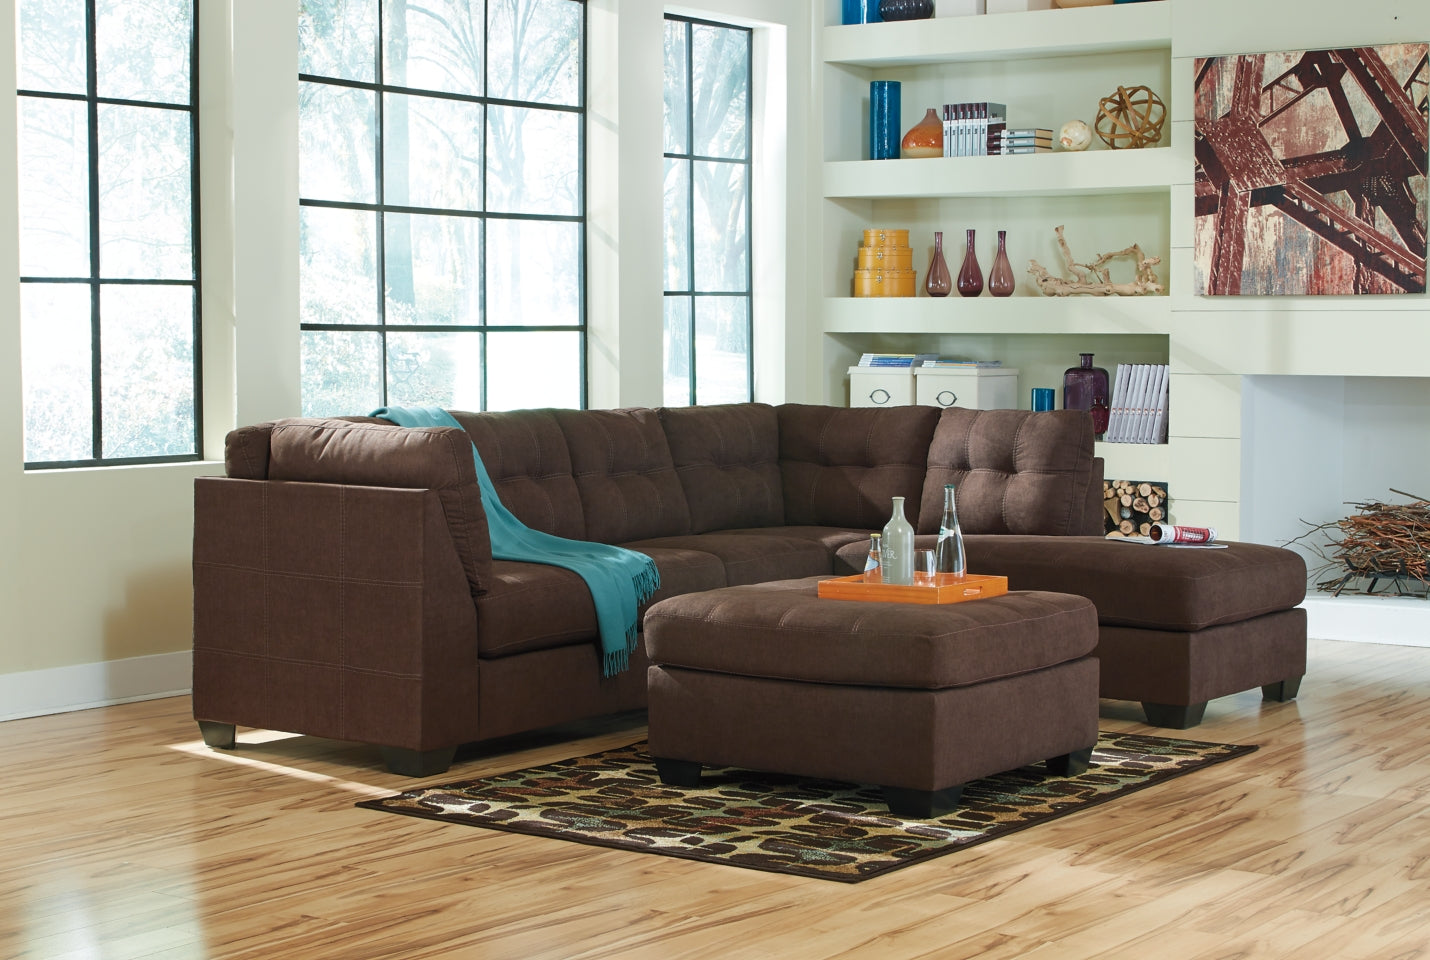 Maier 2-Piece Sectional with Ottoman - PKG010963 - furniture place usa